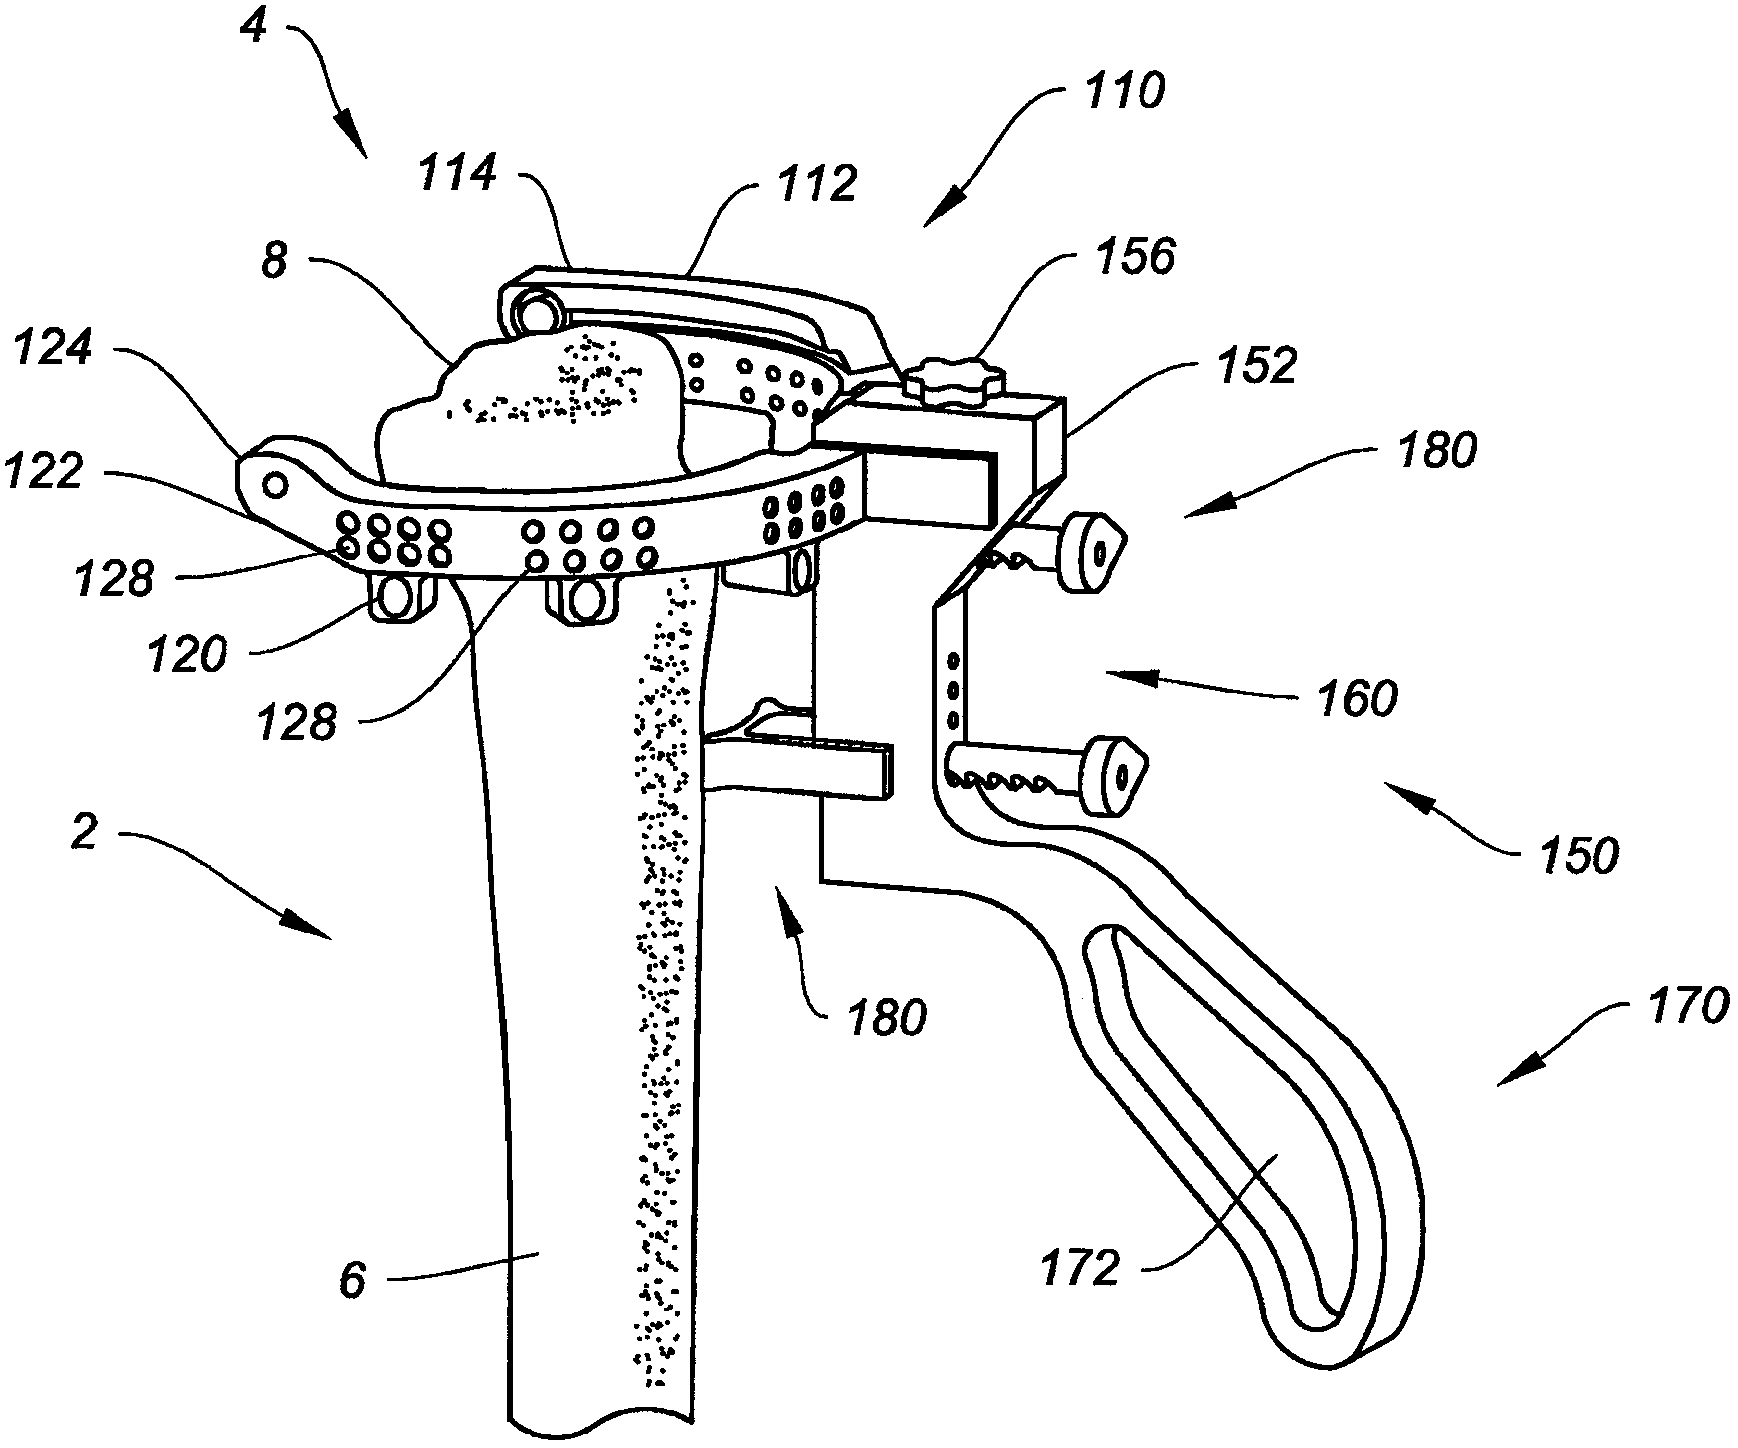 Navigation and positioning instruments for joint repair